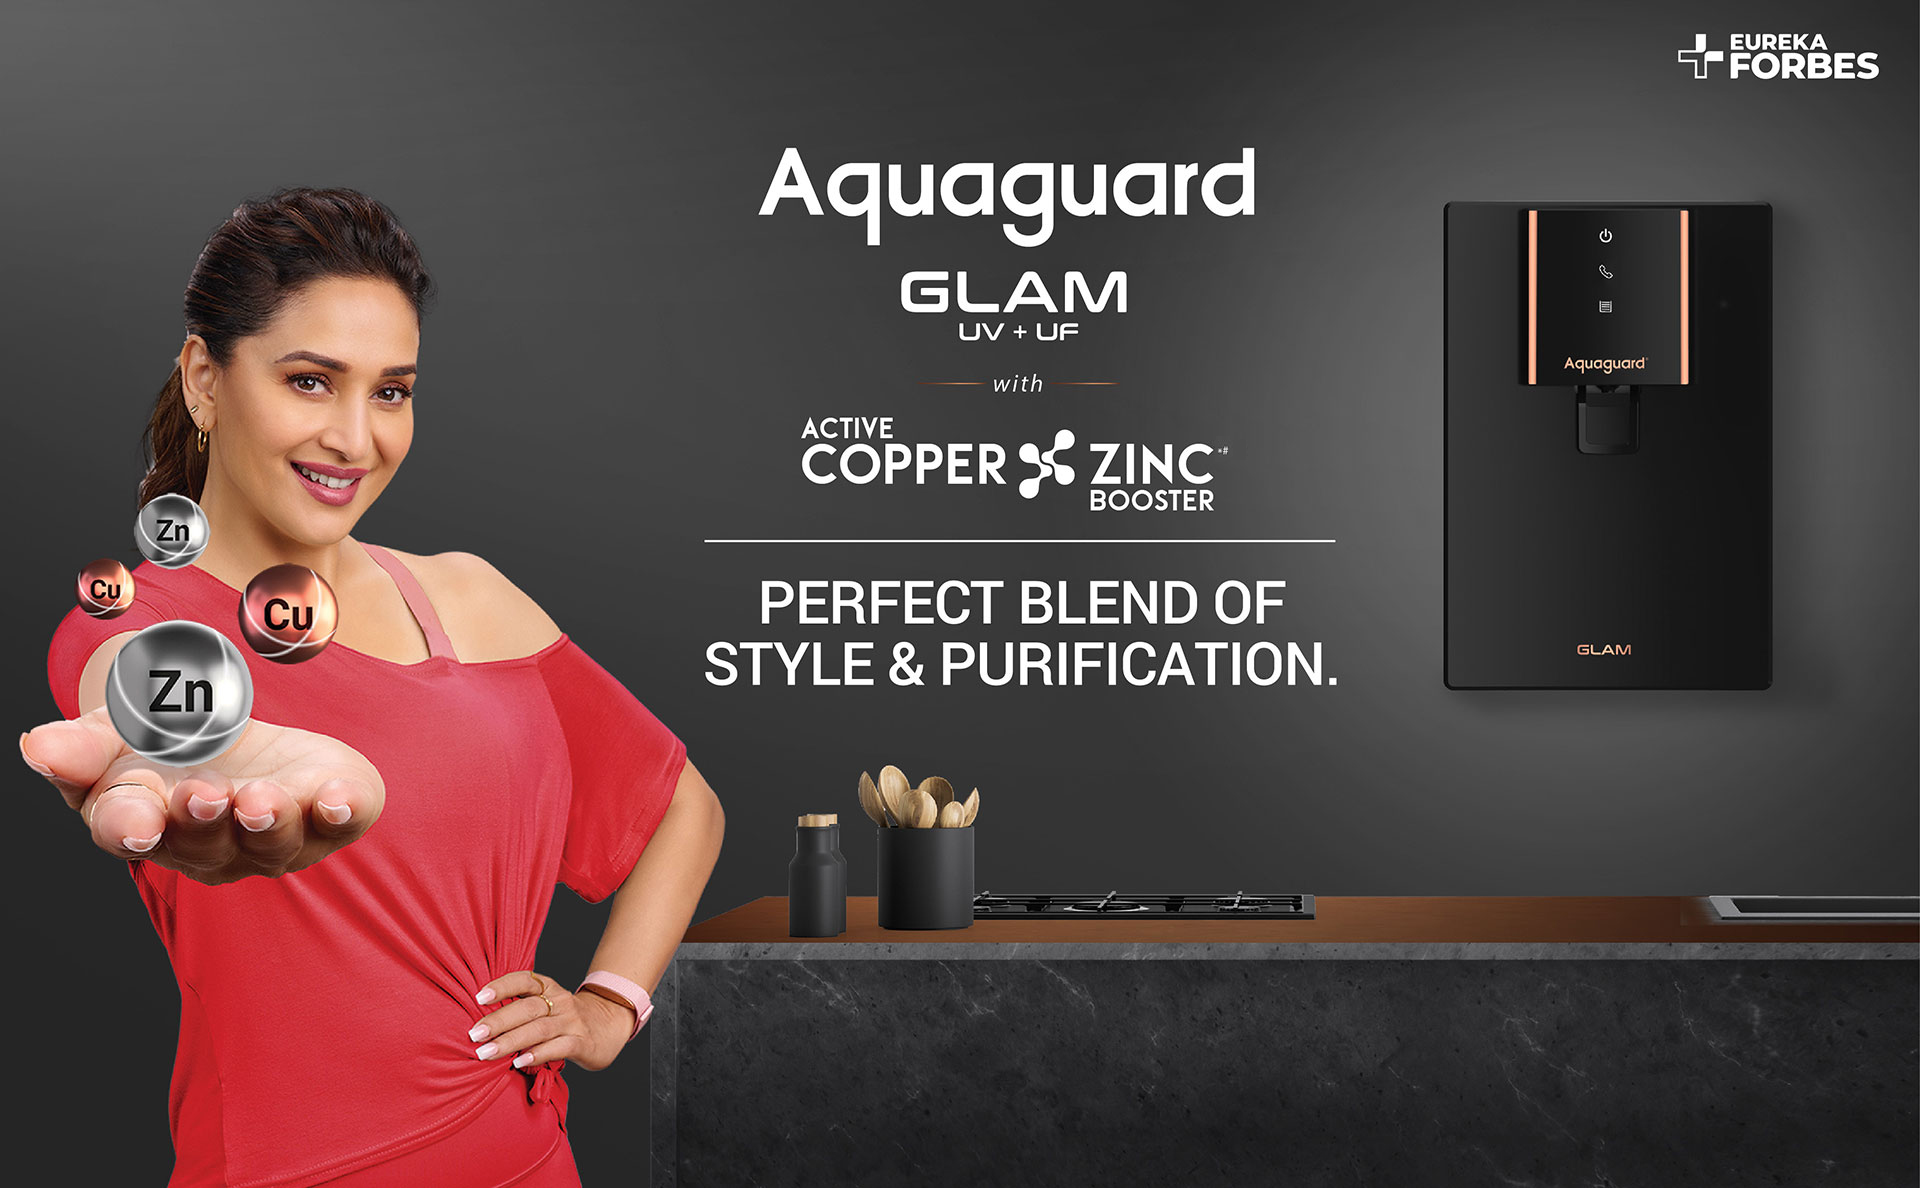 Aquaguard GLAM UV + UF with Active Copper wit Zinc Booster PERFECT BLEND OF STYLE & PURIFICATION.